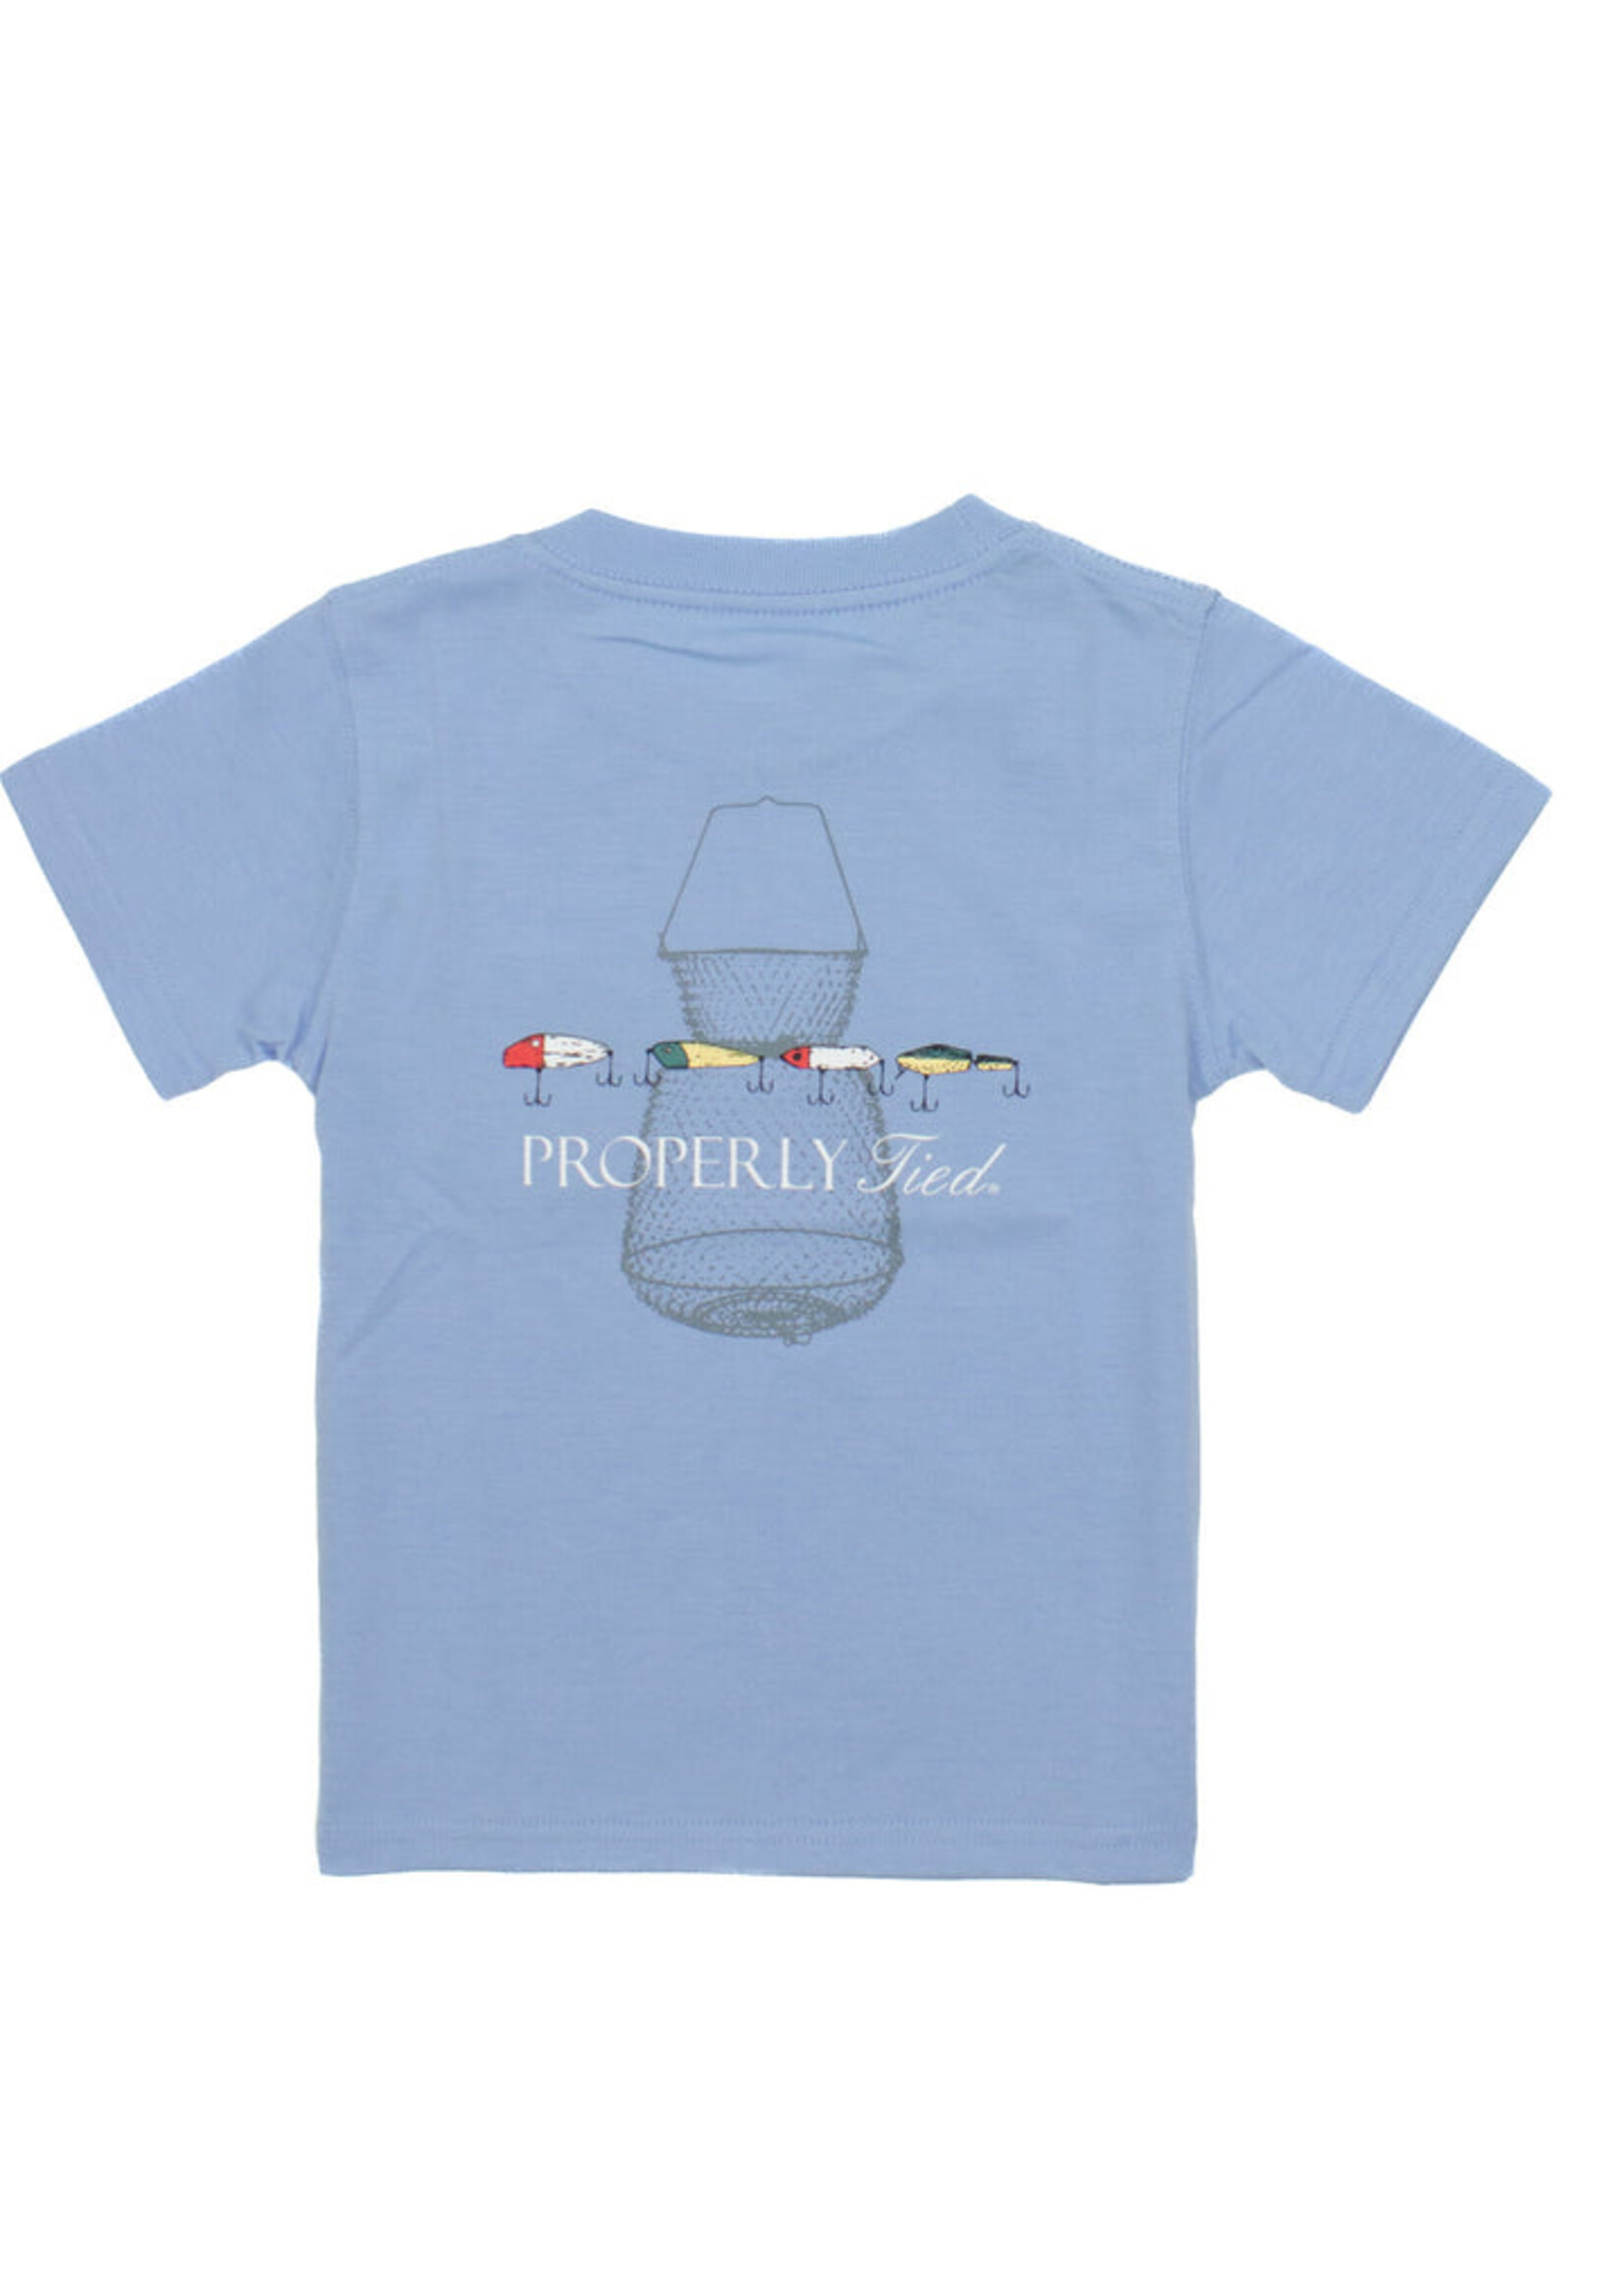 Properly Tied Boys Vintage Lures Light Blue Tee